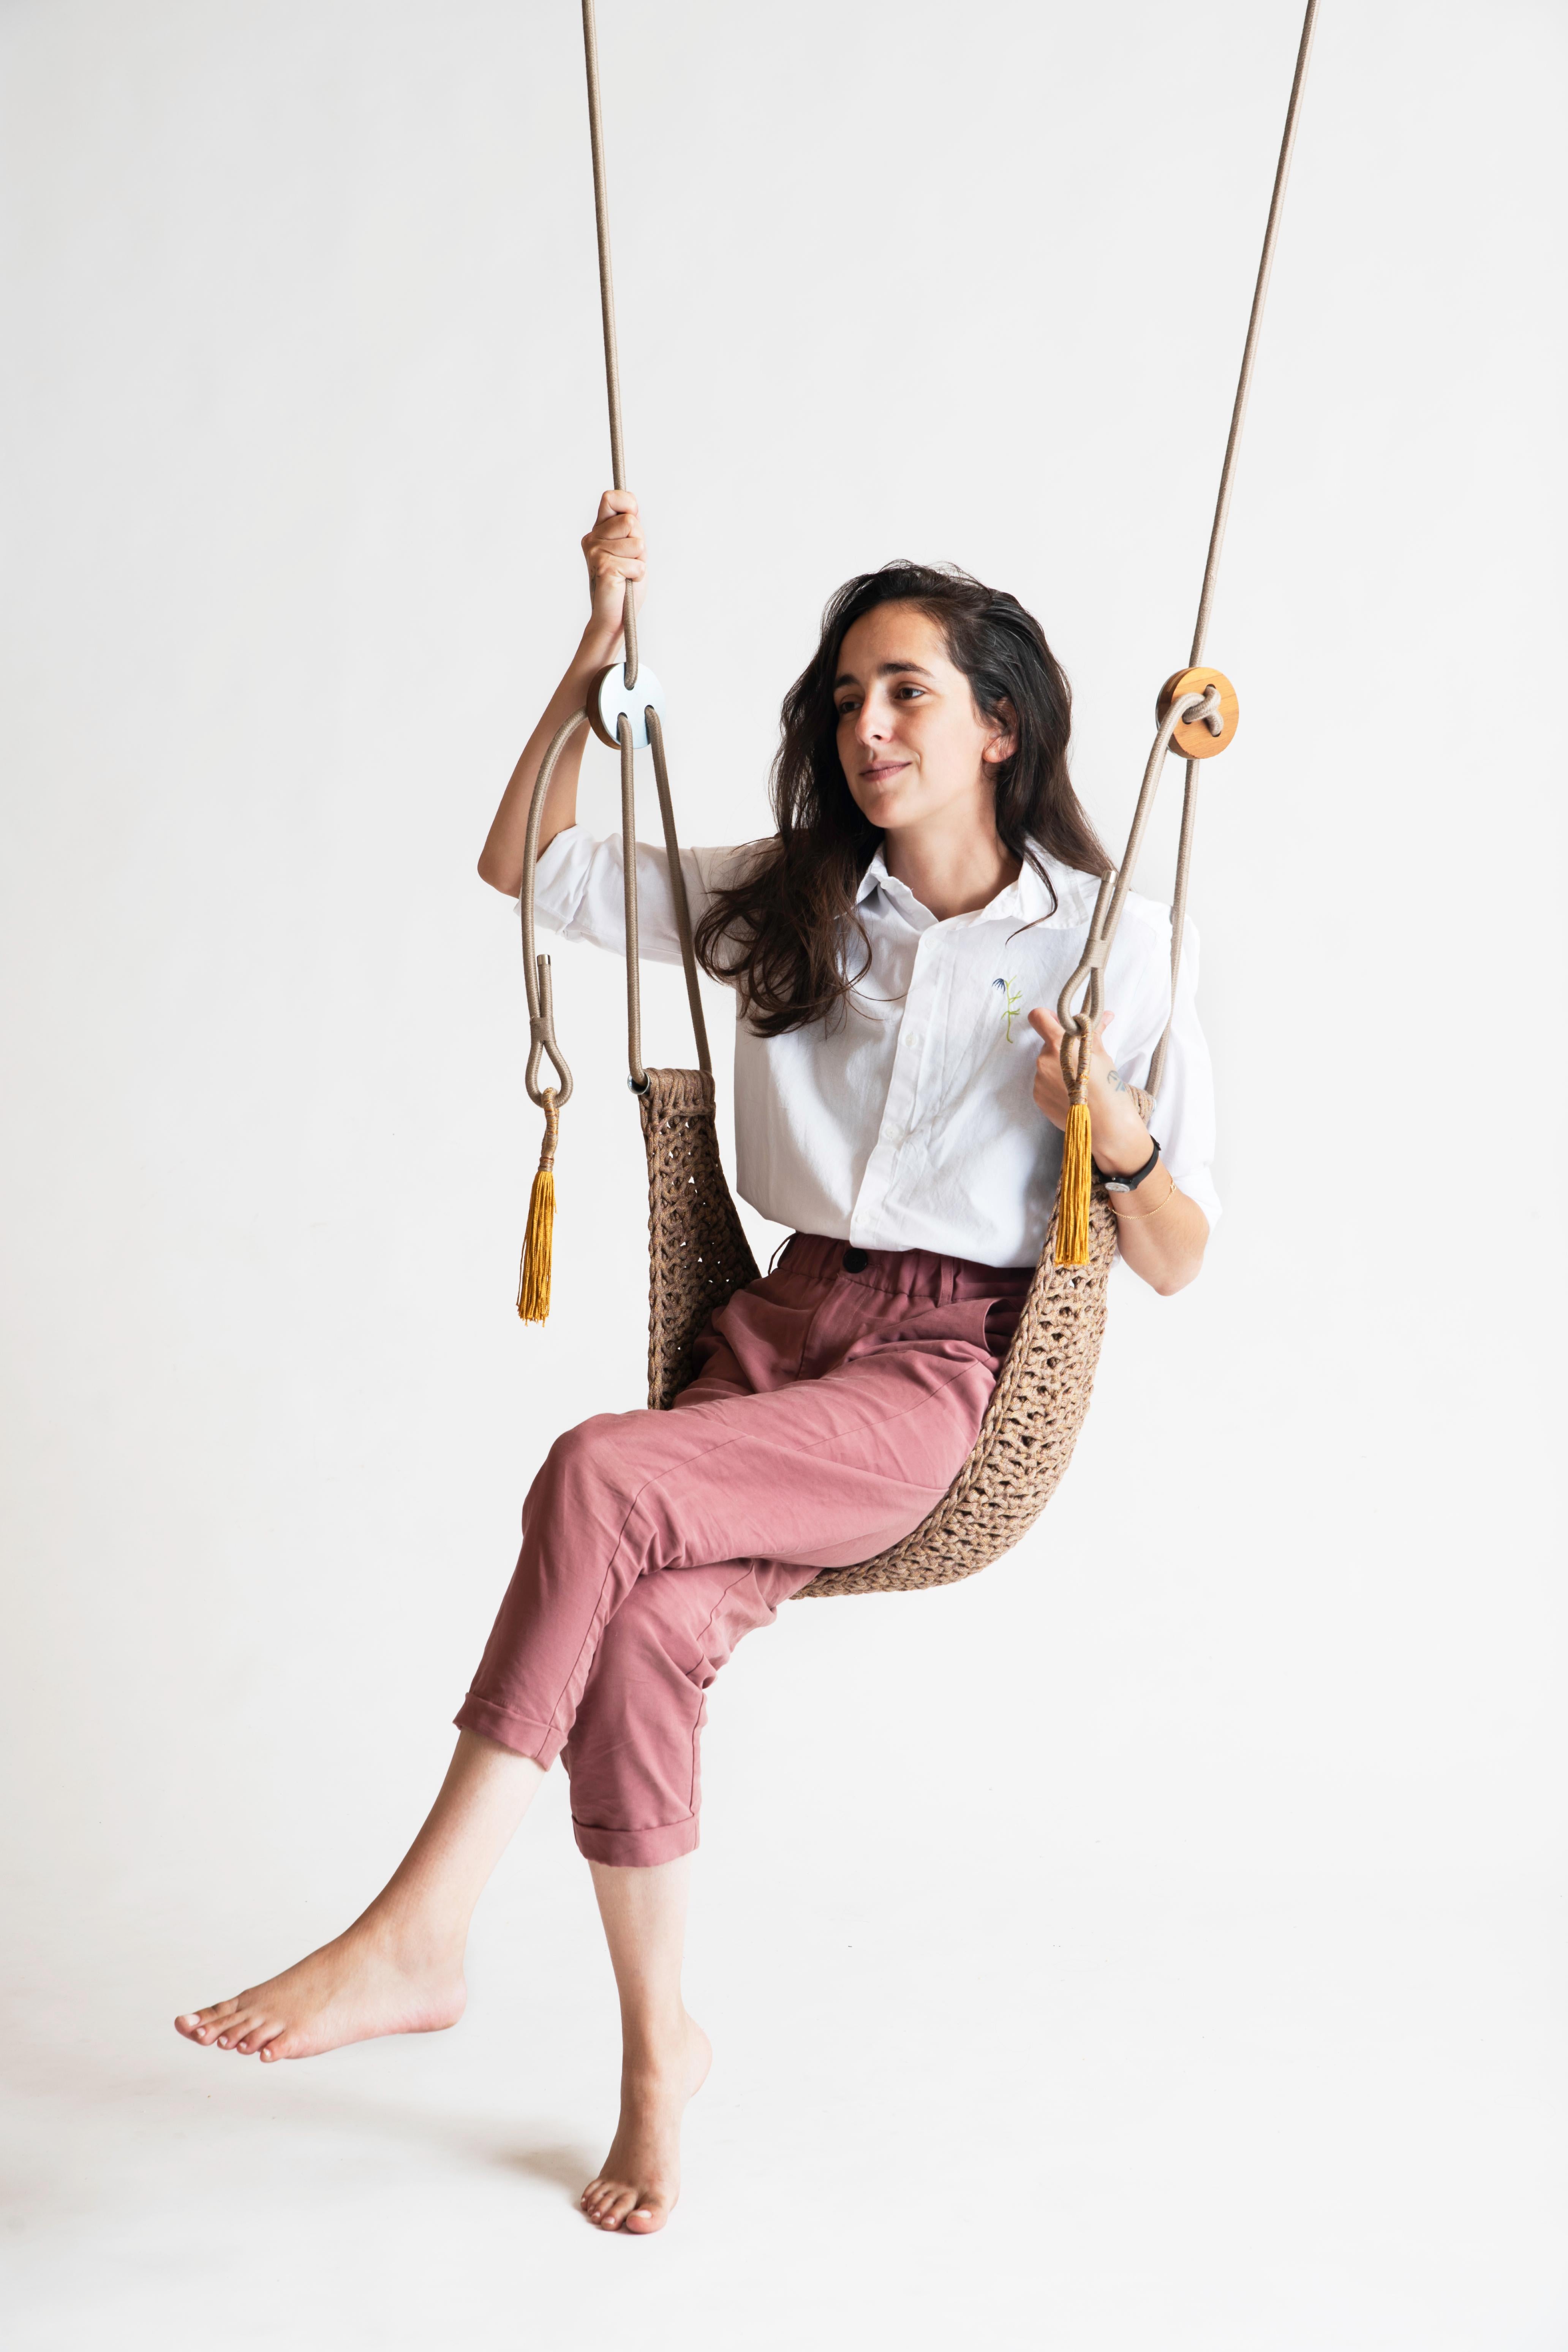 The iota Saddle Swings are lightweight and compact. They are perfect for enjoying the outdoors and kids love them too. You can easily take the hammock like swing with you to hang during camping trips. The swings are handmade from a signature yarn